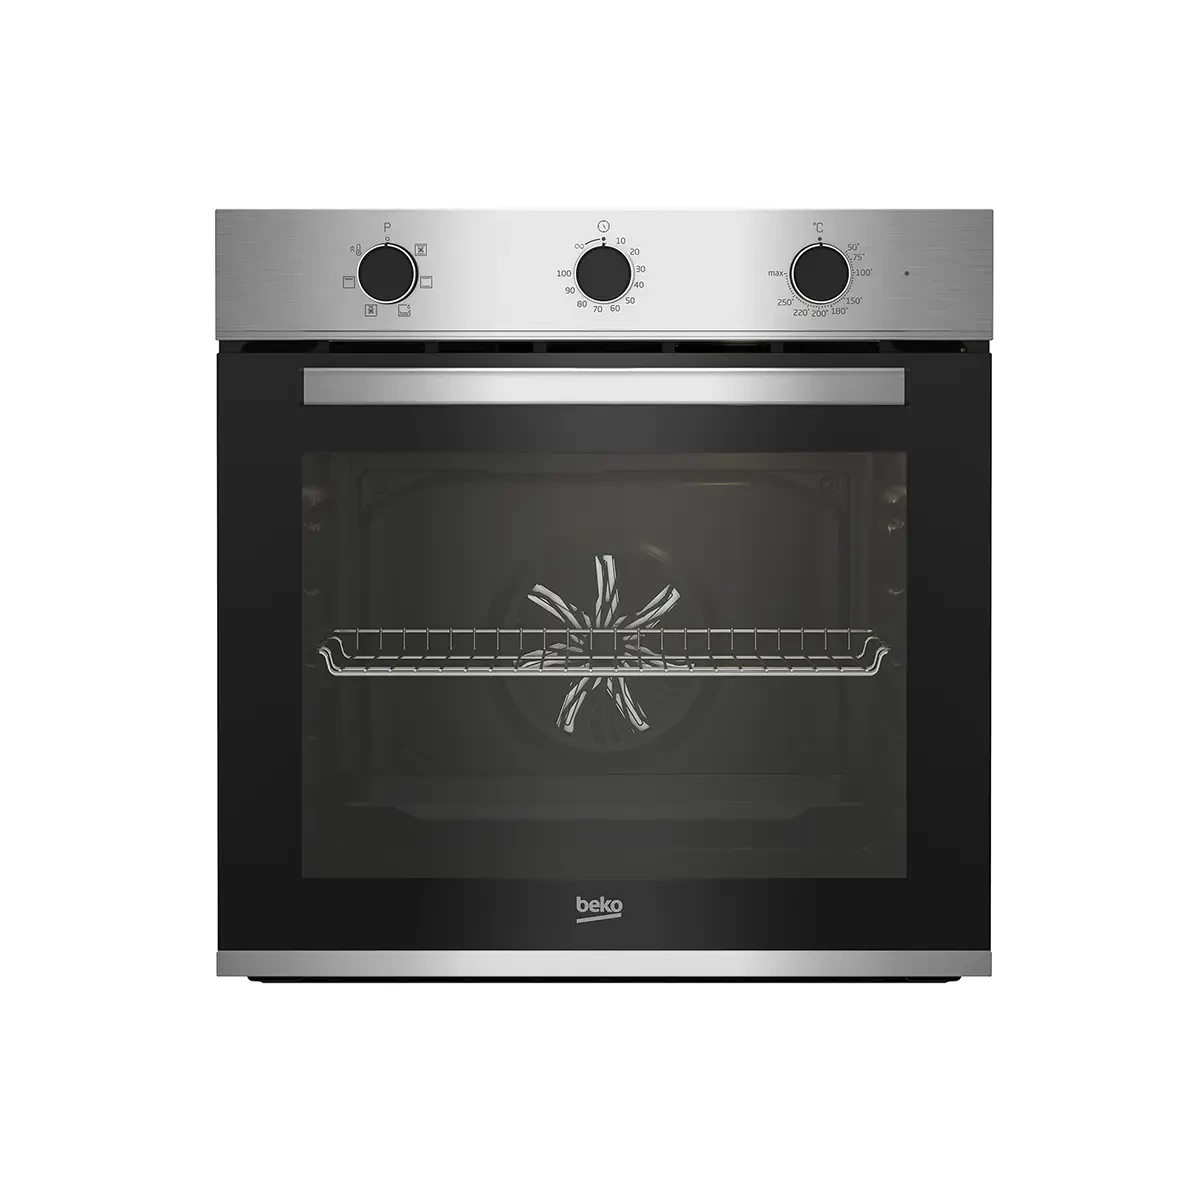 Beko Gas Built-in Ovens 60cm - Gas Safety- Cooling Fan - Cooking fan Integrated Electronic Ignition